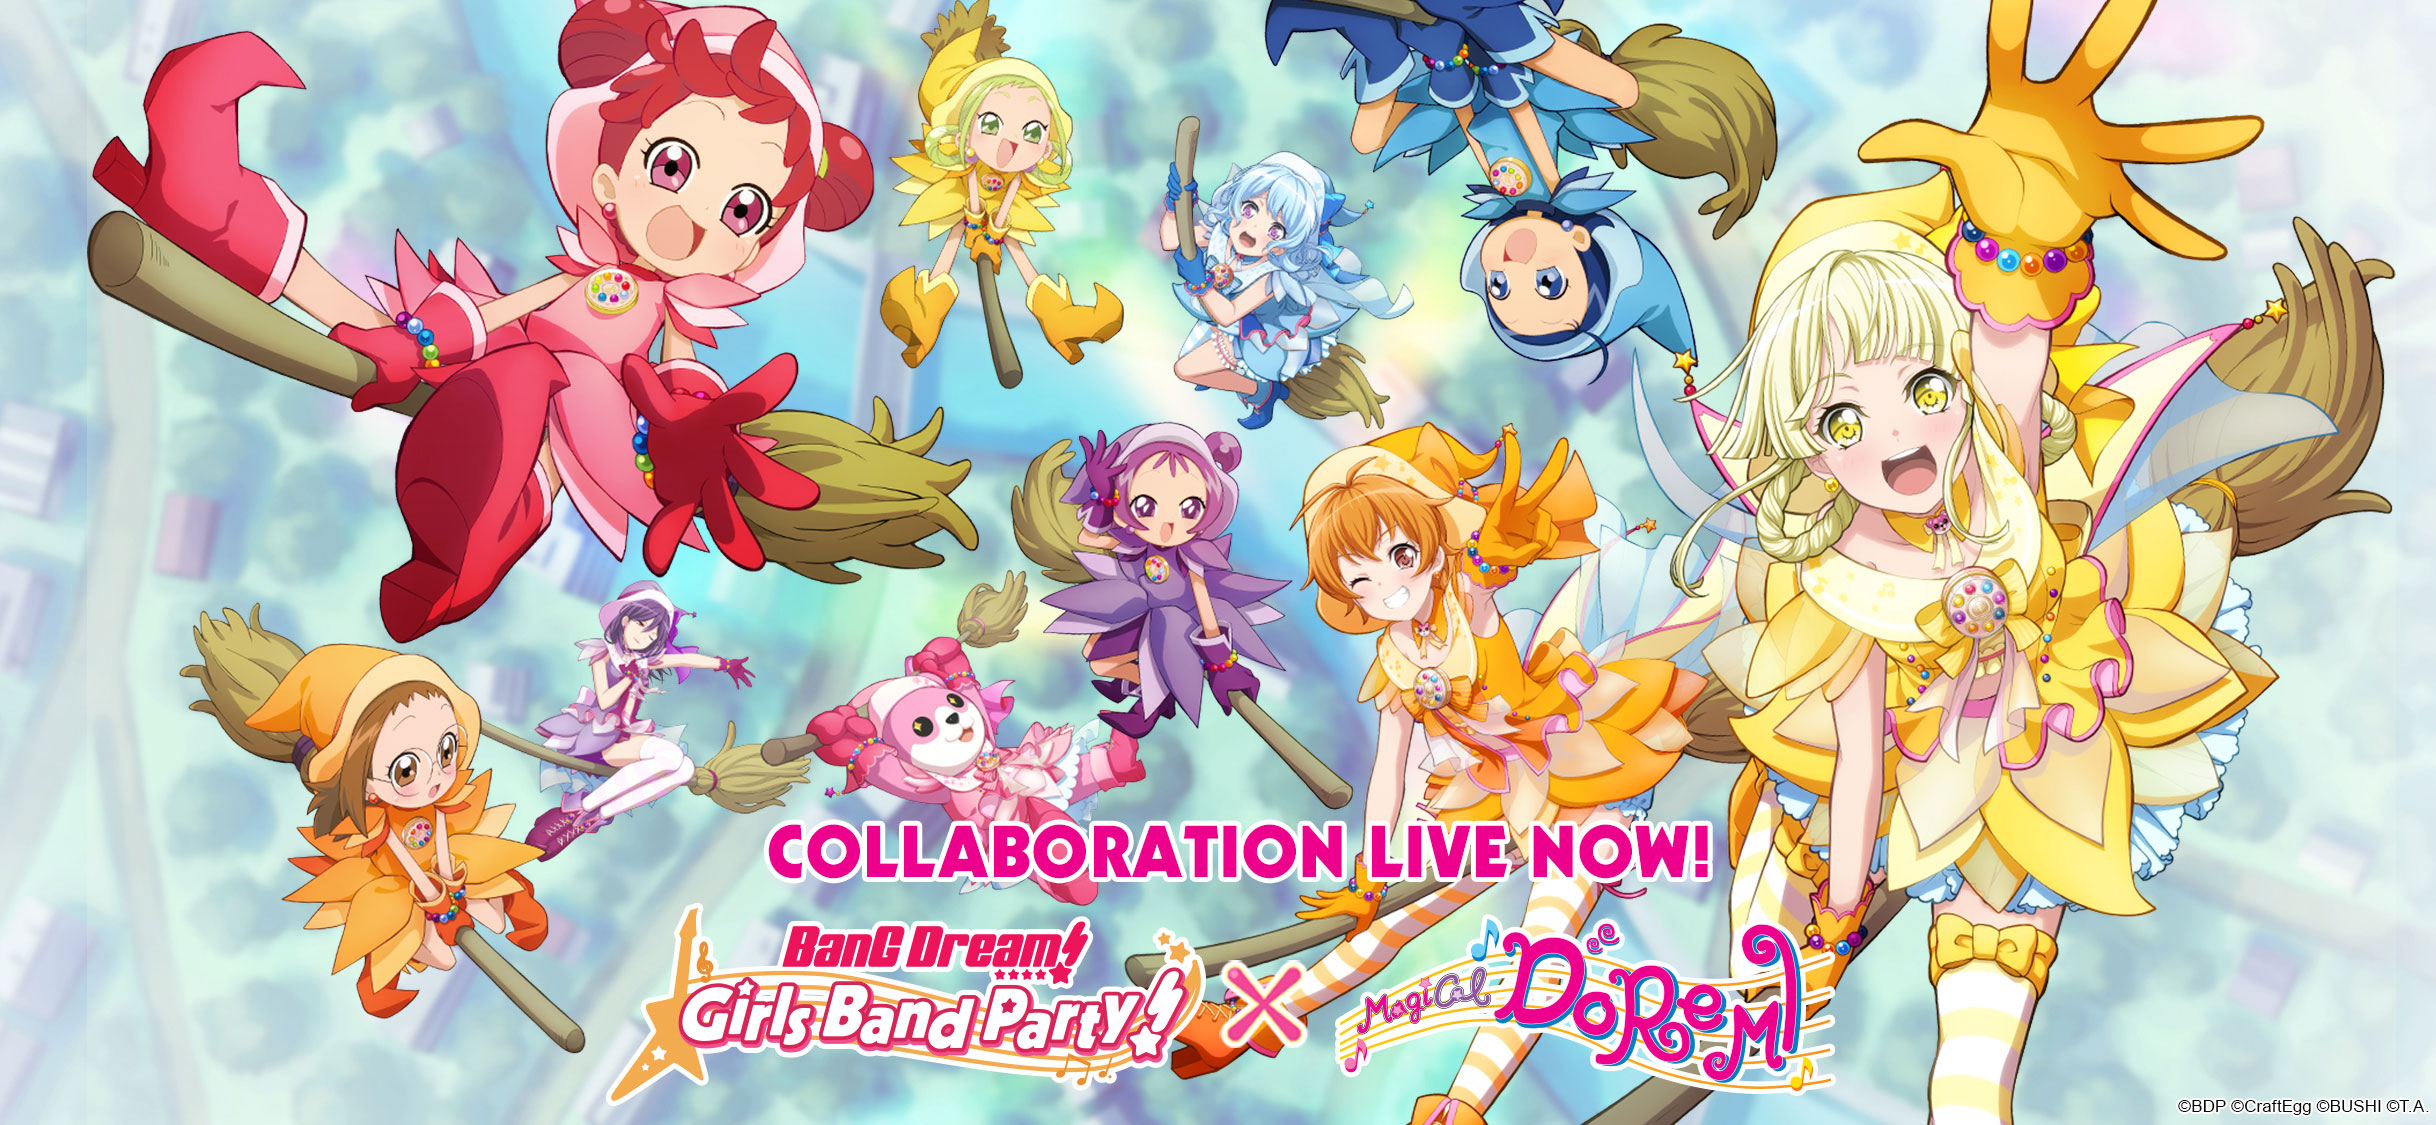 Bang dream! Girls band party! Launches collaboration with magical doremi Top Banner